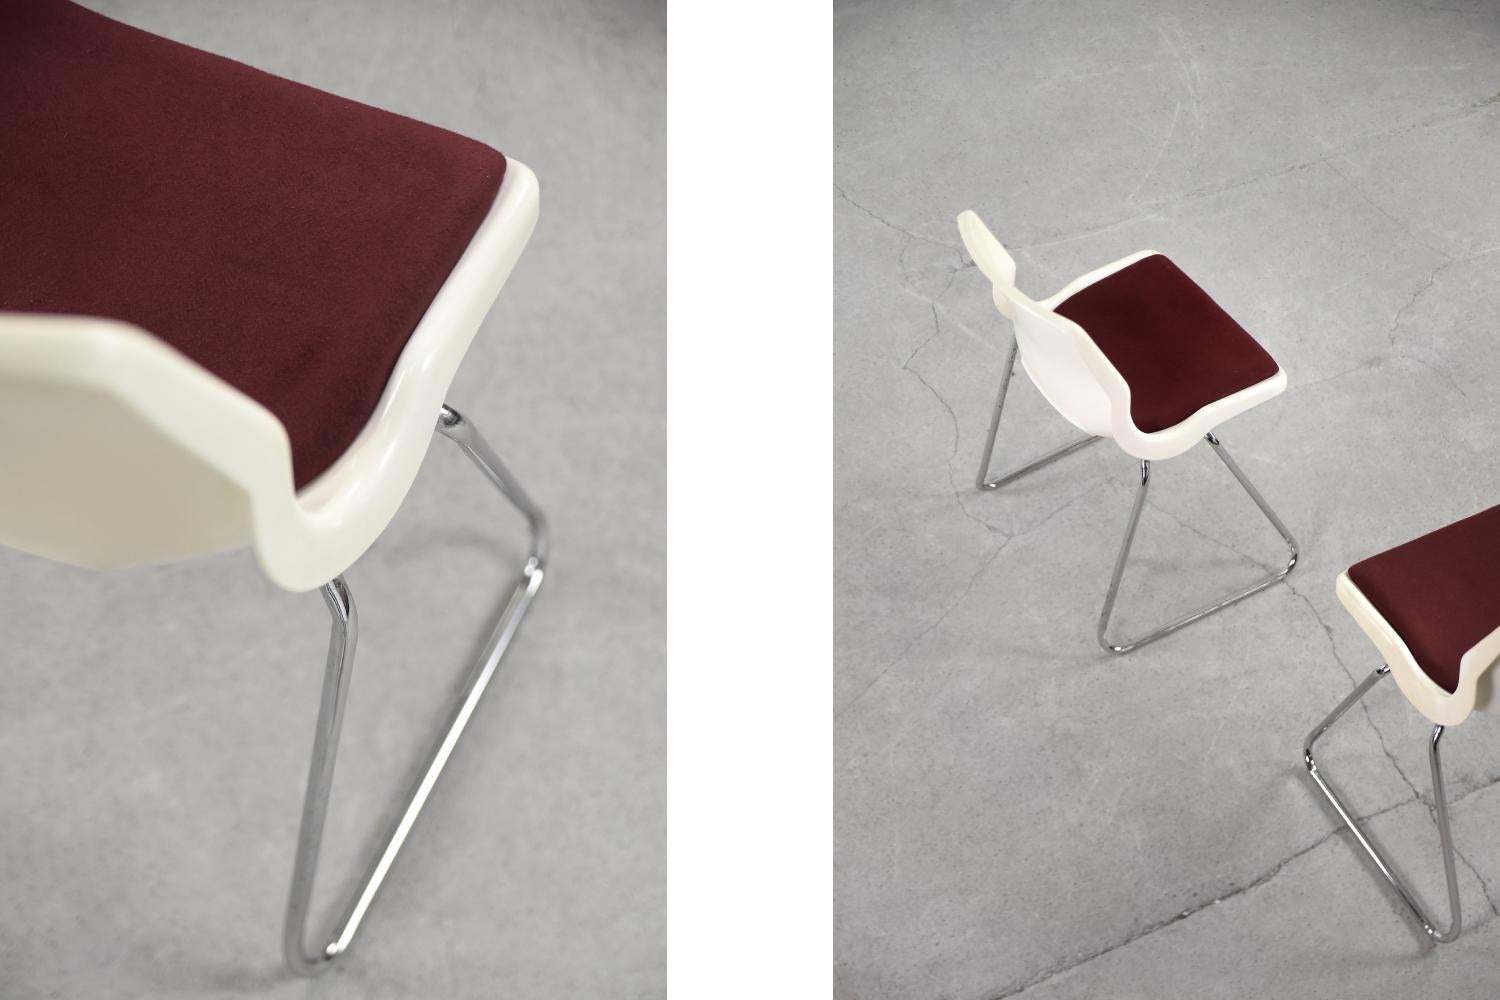 Set of 5 Vintage Mid-Century Modern Scandinavian Plastic & Fabric Chairs, 1970s For Sale 3